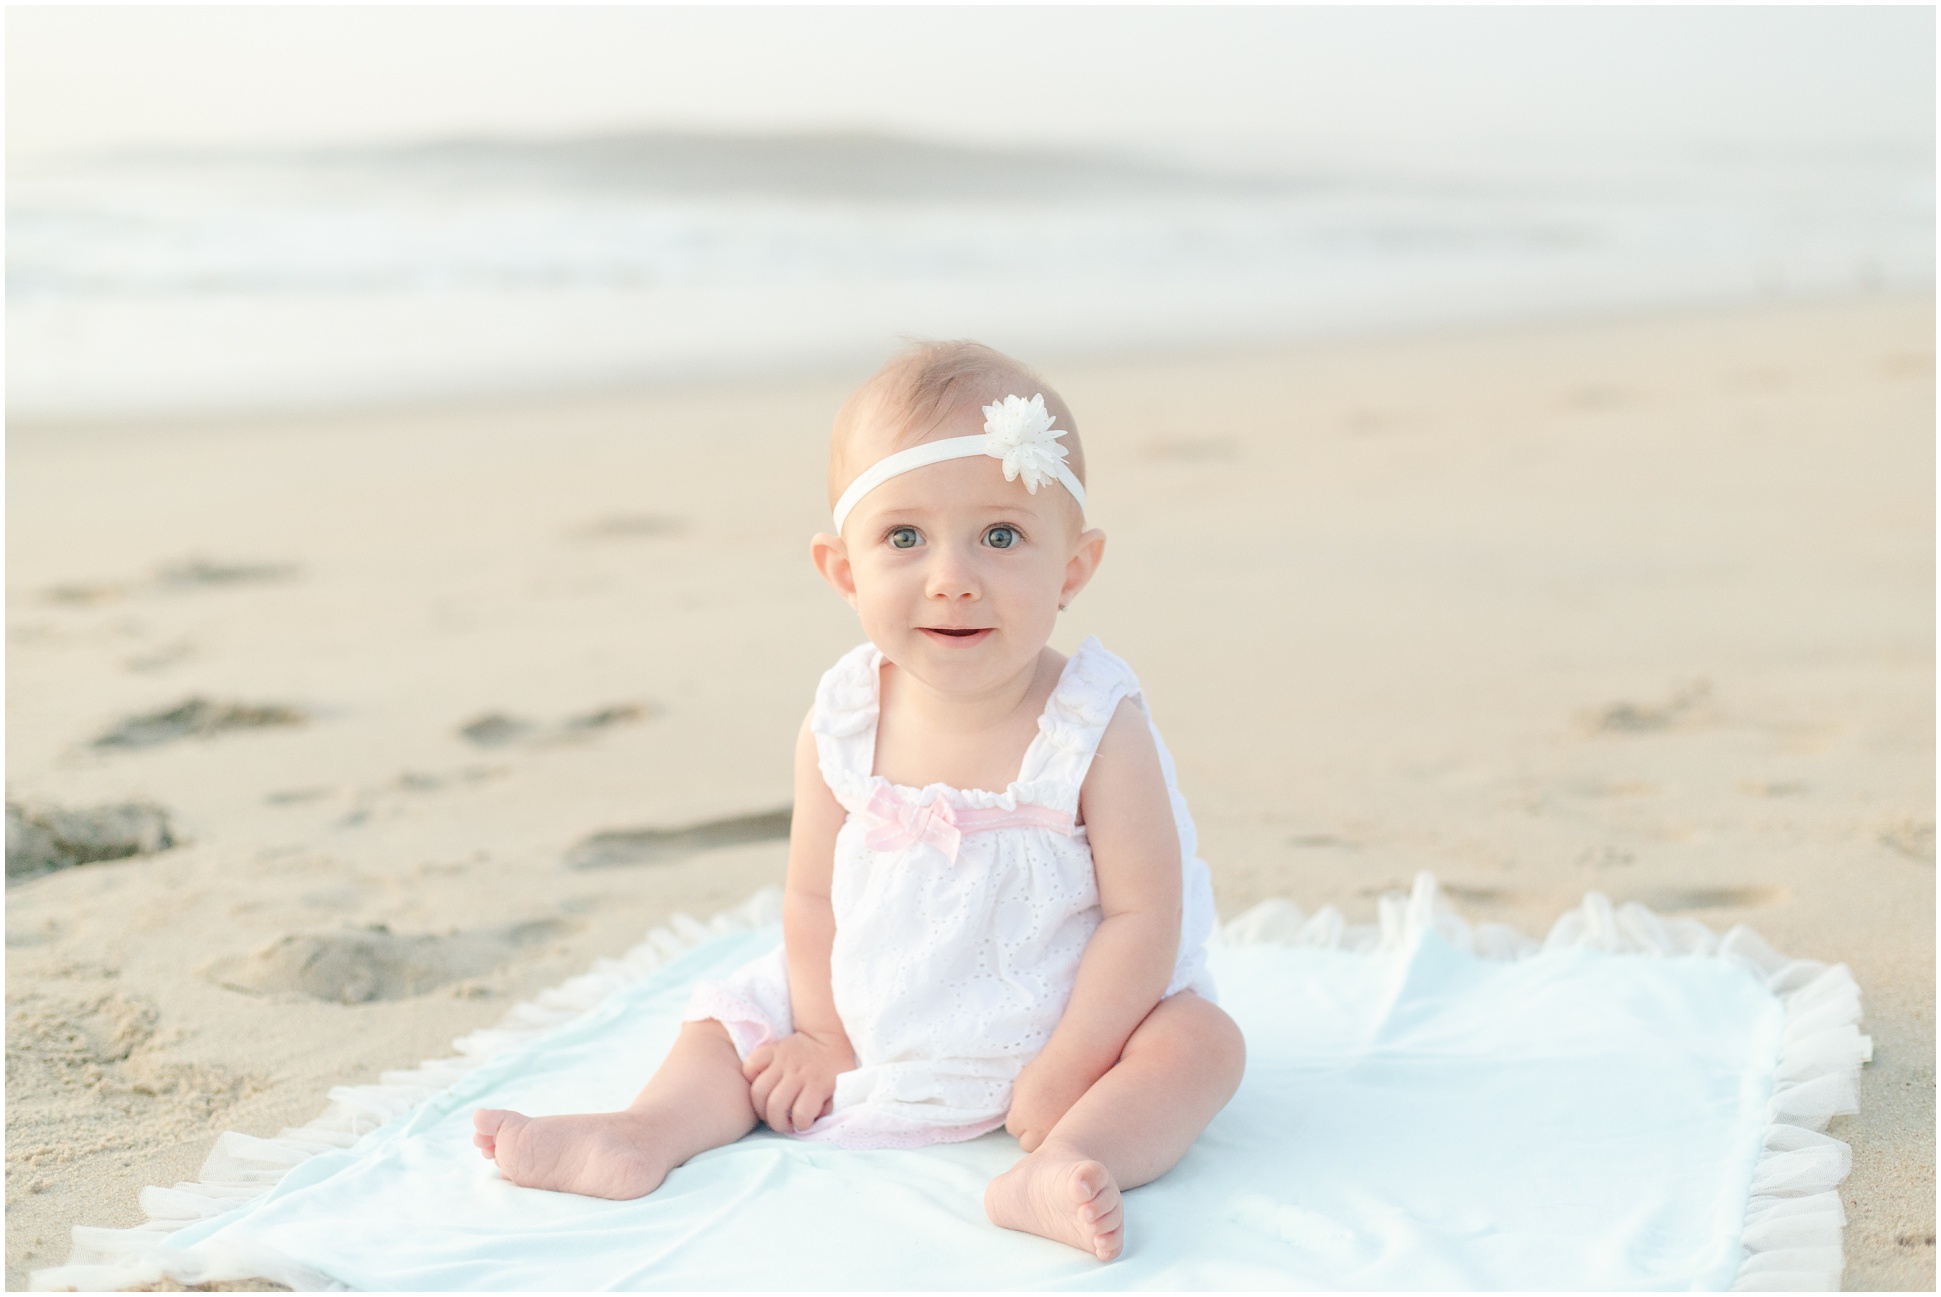 Baby Girl with white hand band sitting on a blanket in the sand